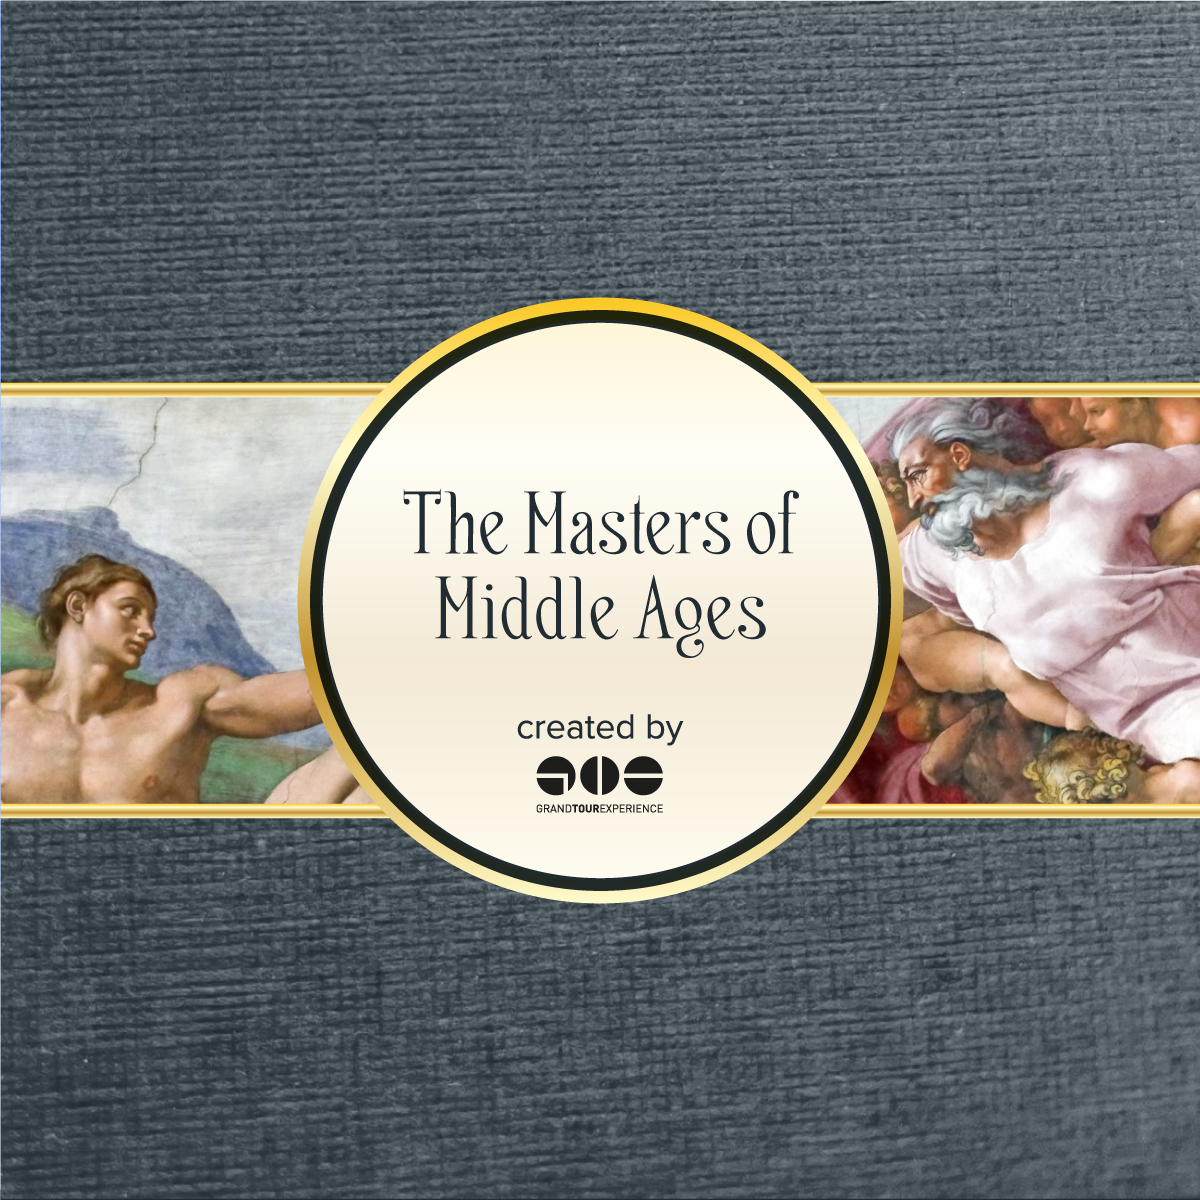 Rome: the Masters of Middle Ages